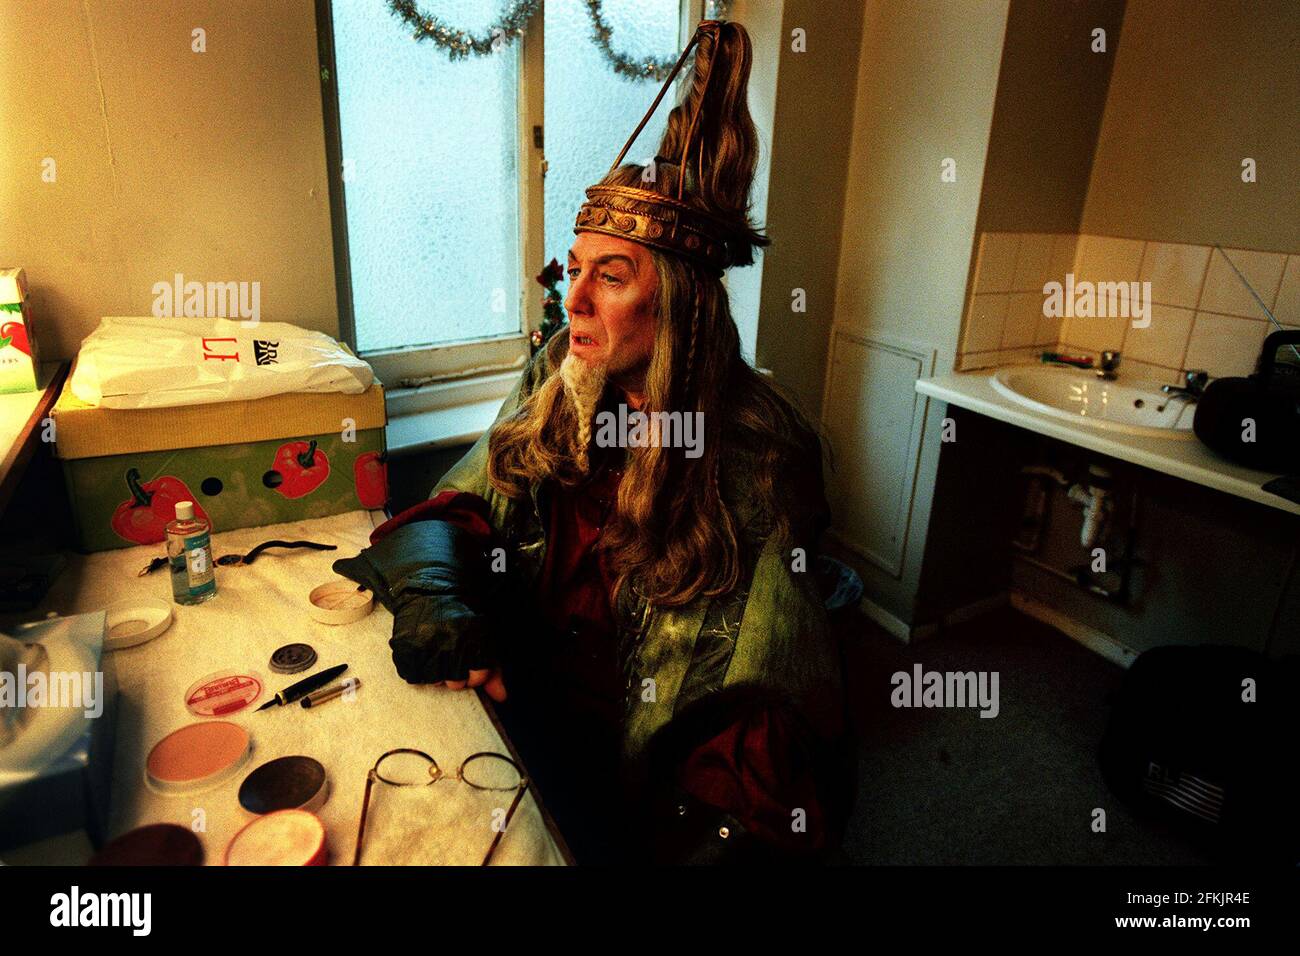 Theatre Plays The Hobbit December 2000 Actor JAMES EARL ADAIR who plays Gandalf in the theatre production of JRR Tolkien's The Hobbit, relaxes during rehearsals today at the Queens Theatre, London, before tonights opening show. 12 December 2000 photo Andy Paradise Stock Photo